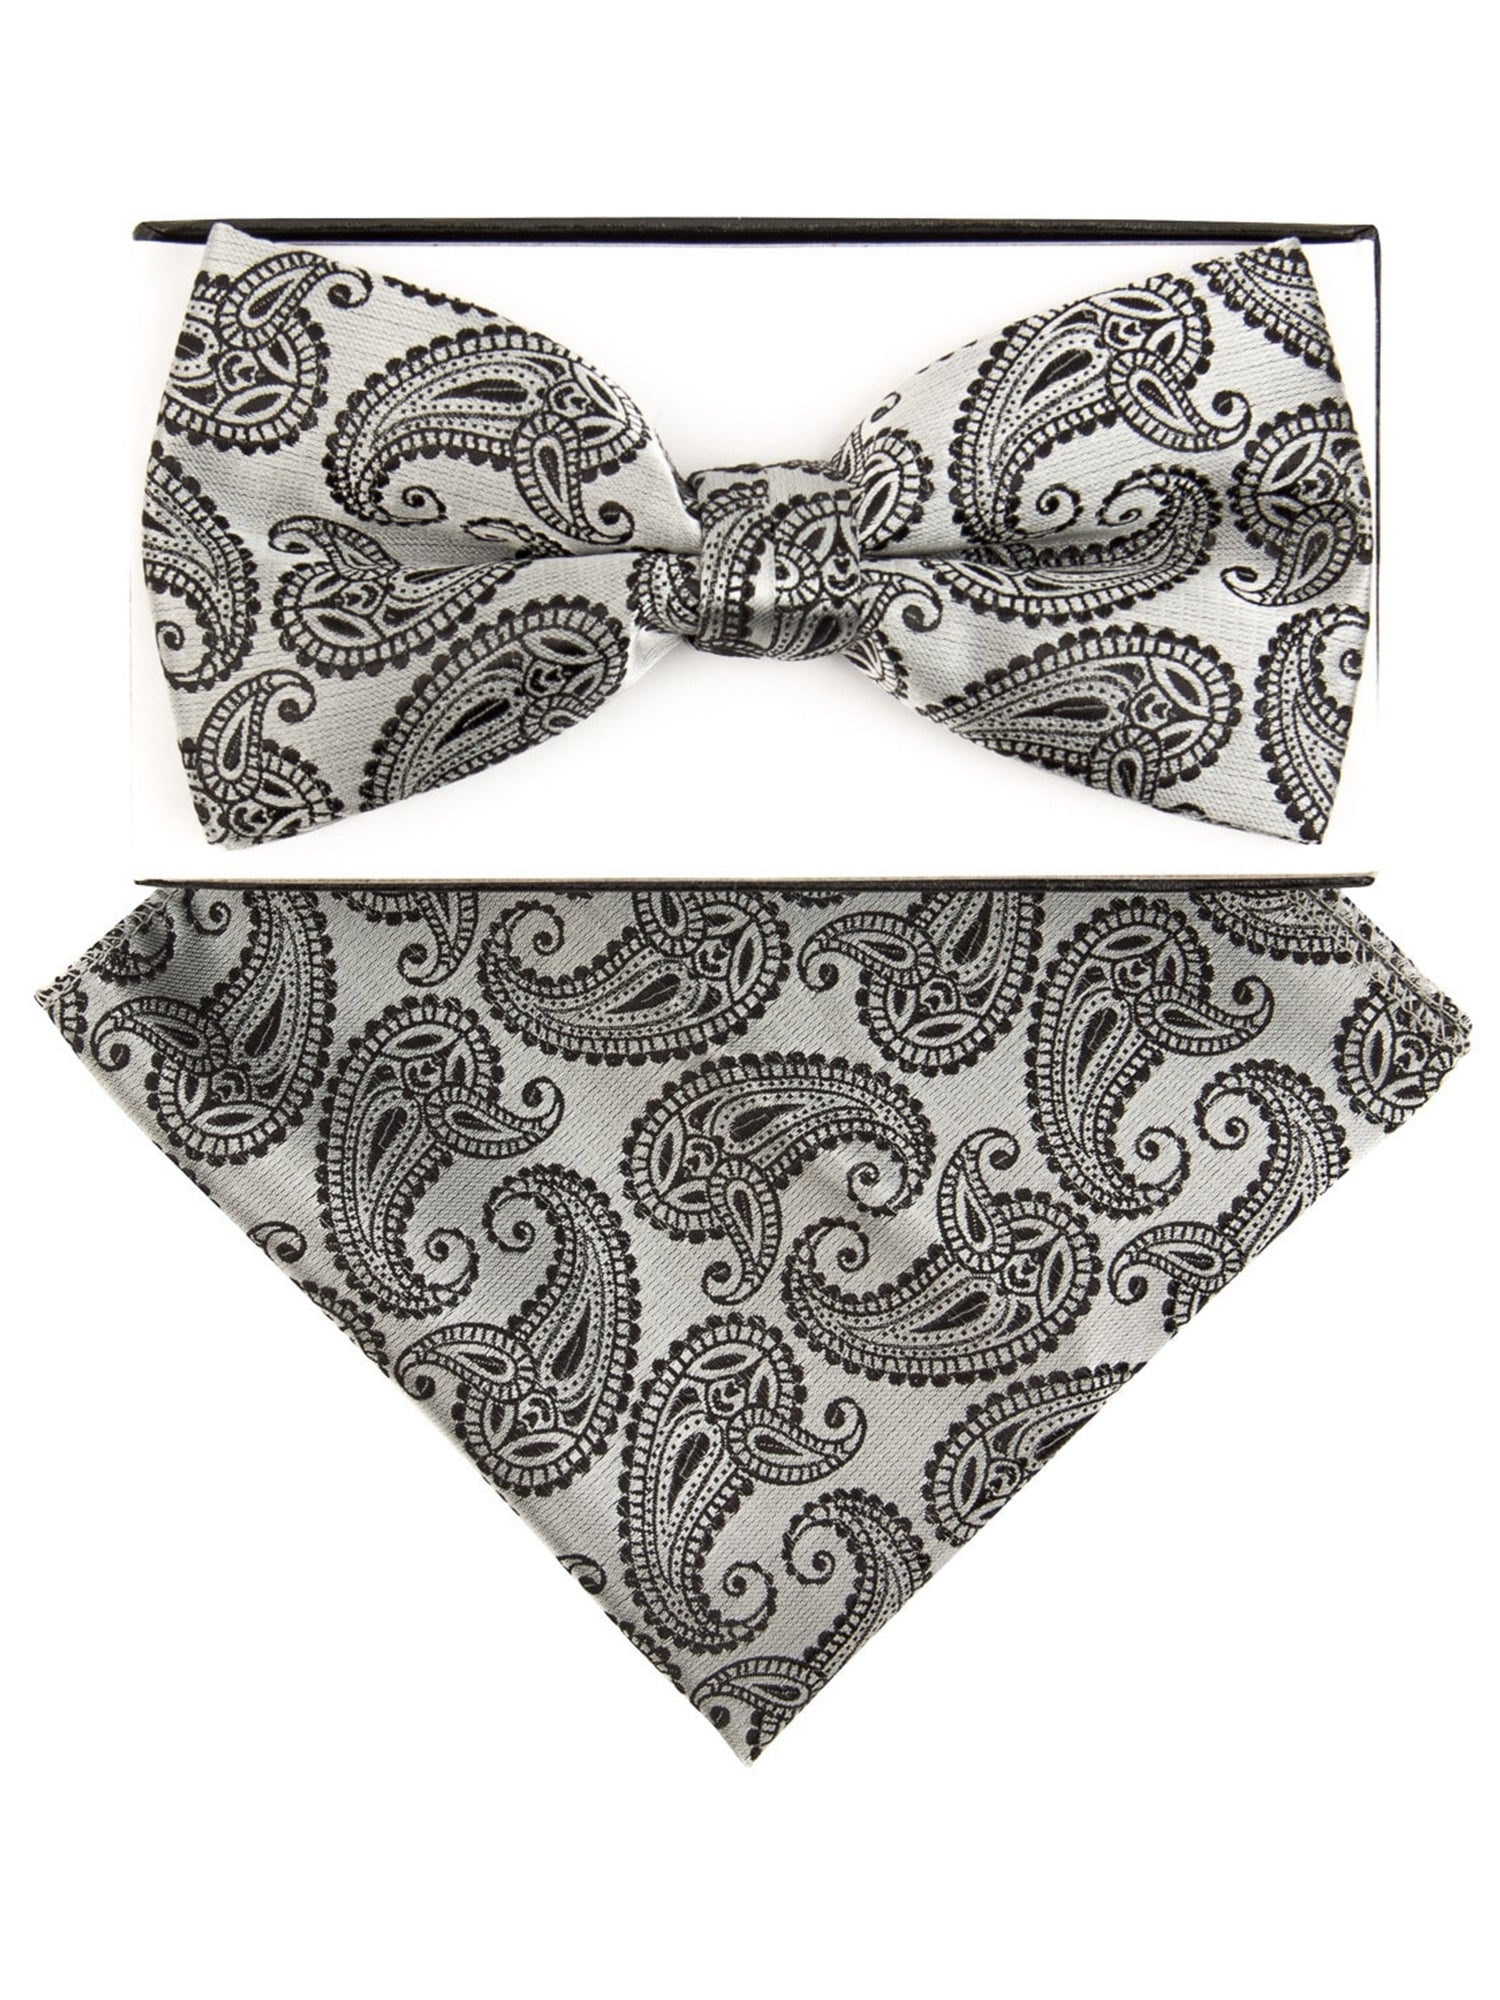 Men's Ivory And Blue Color Paisley Pre-tied Adjustable Bow Tie With Hanky Bow Tie TheDapperTie Ivory And Blue One Size 